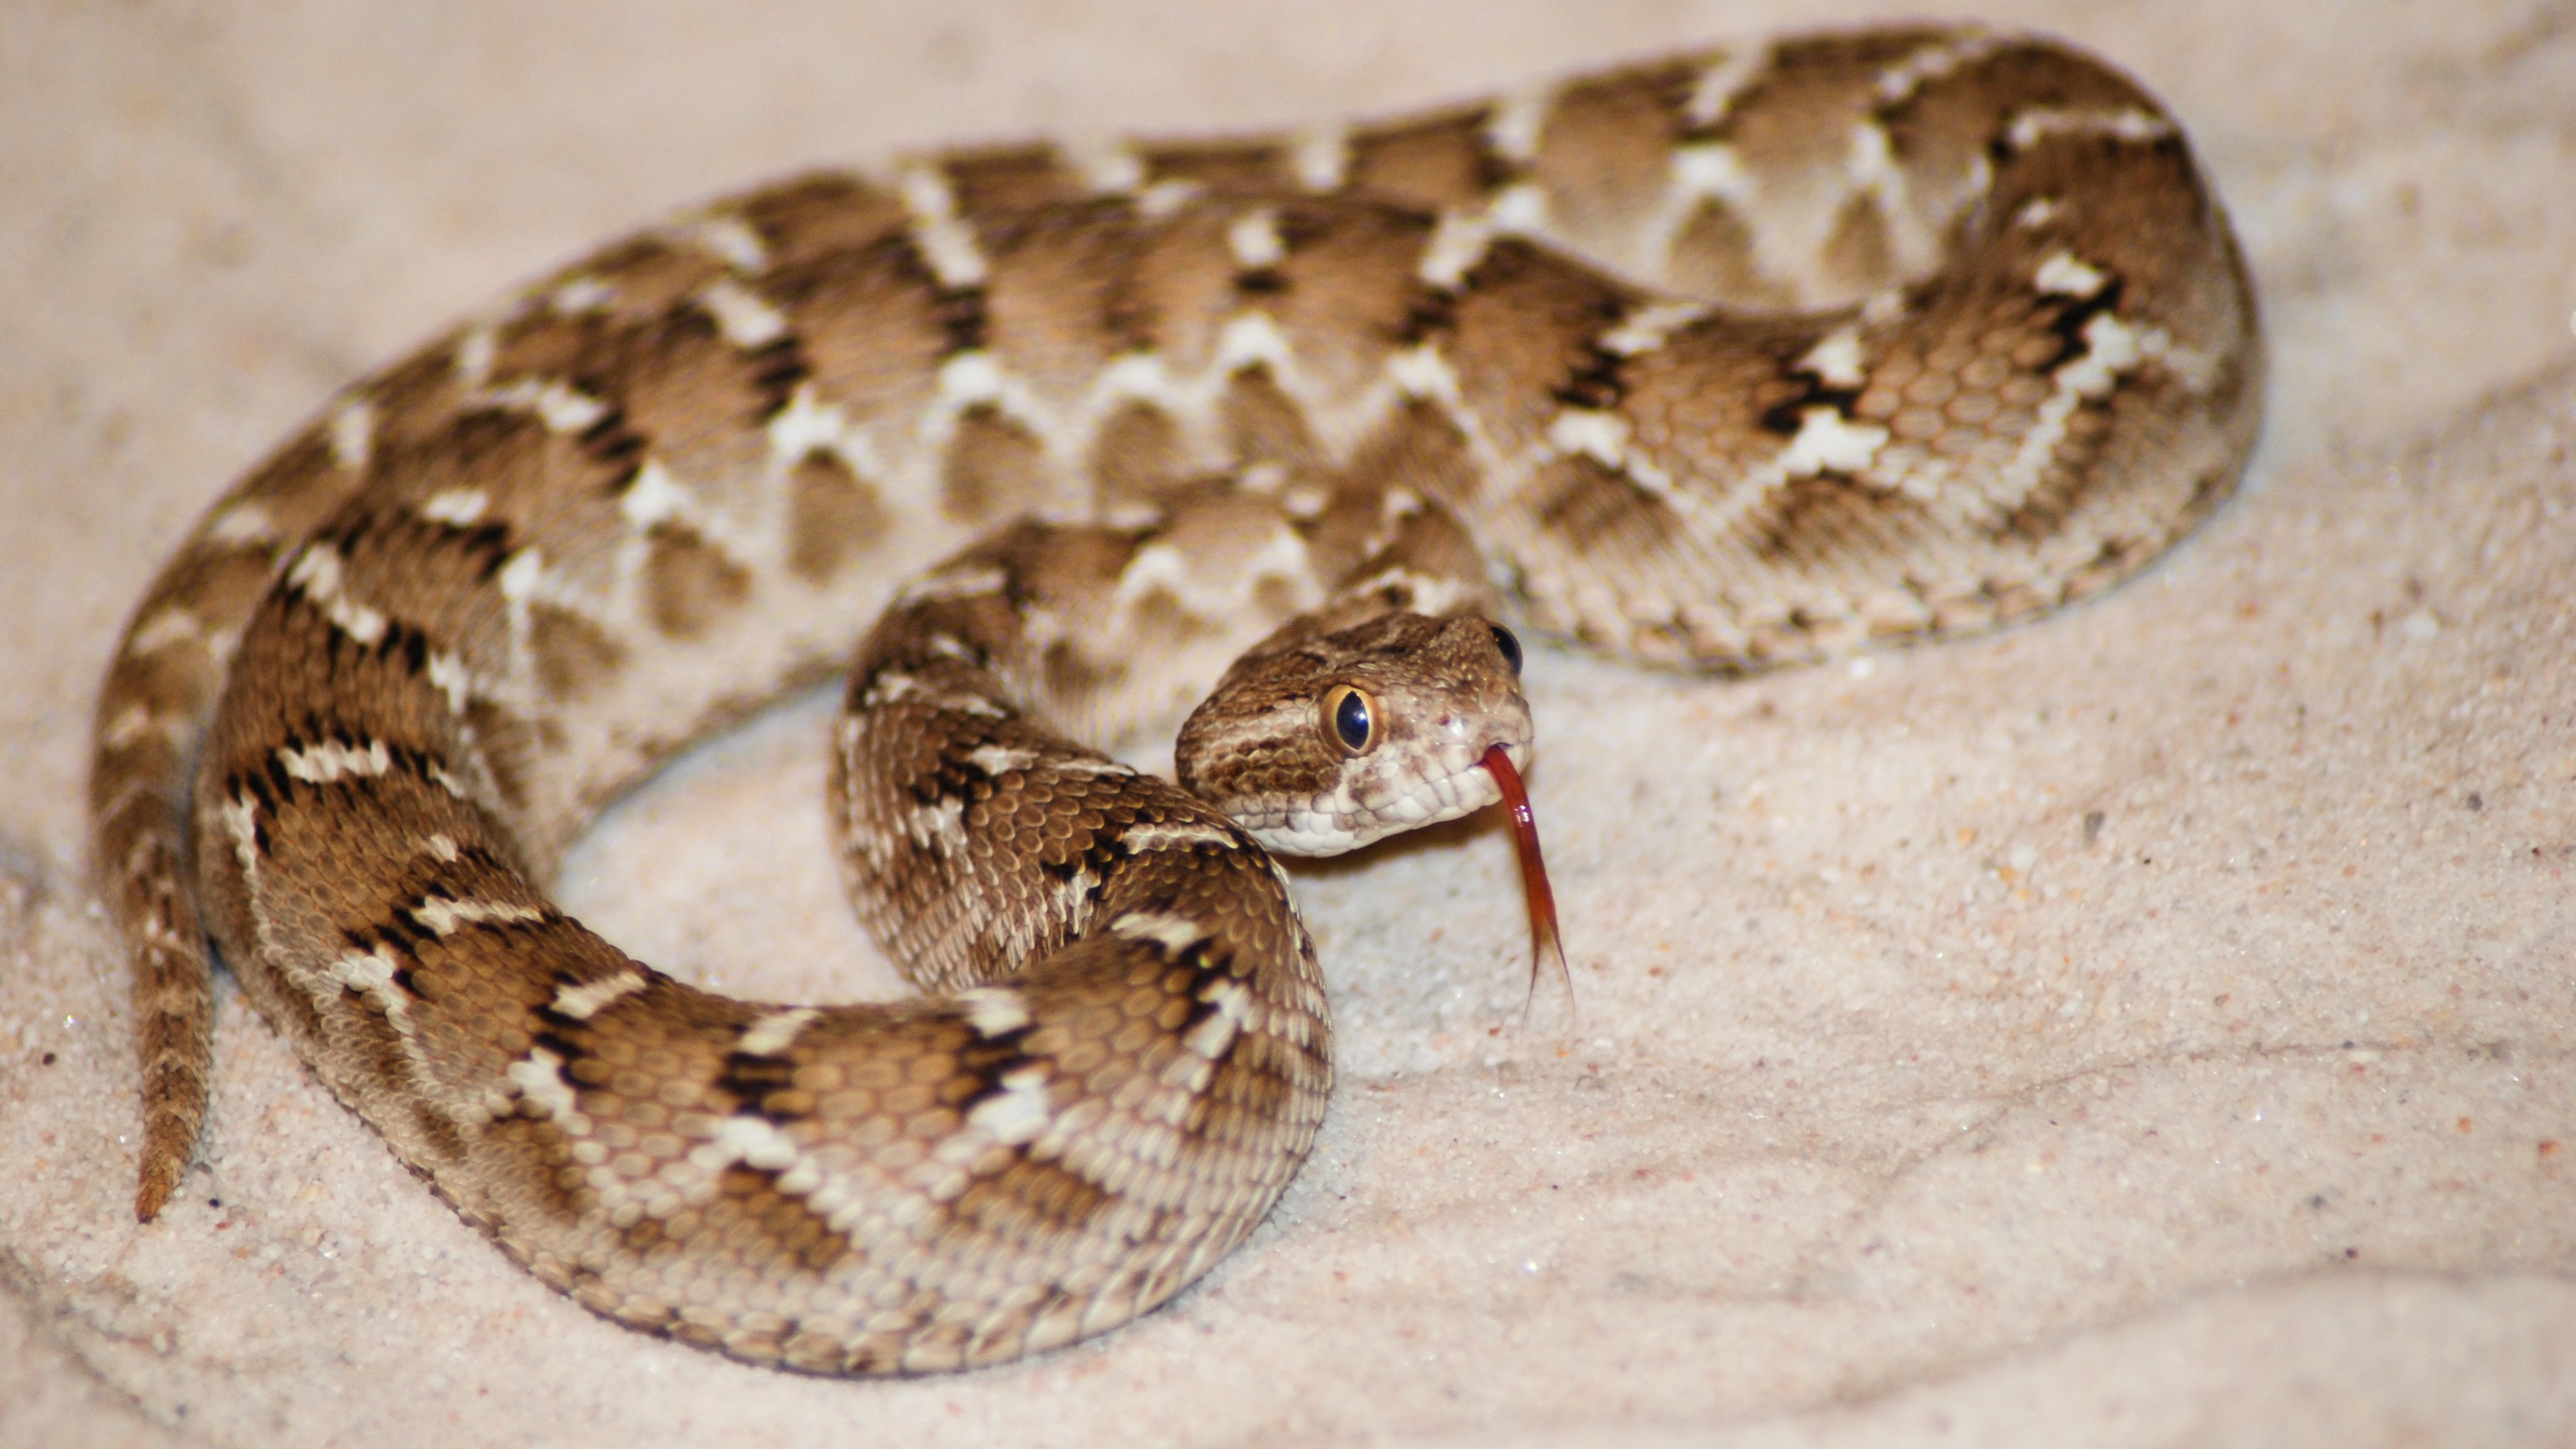 a saw-scaled viper flicking its tongue coiled up on sand